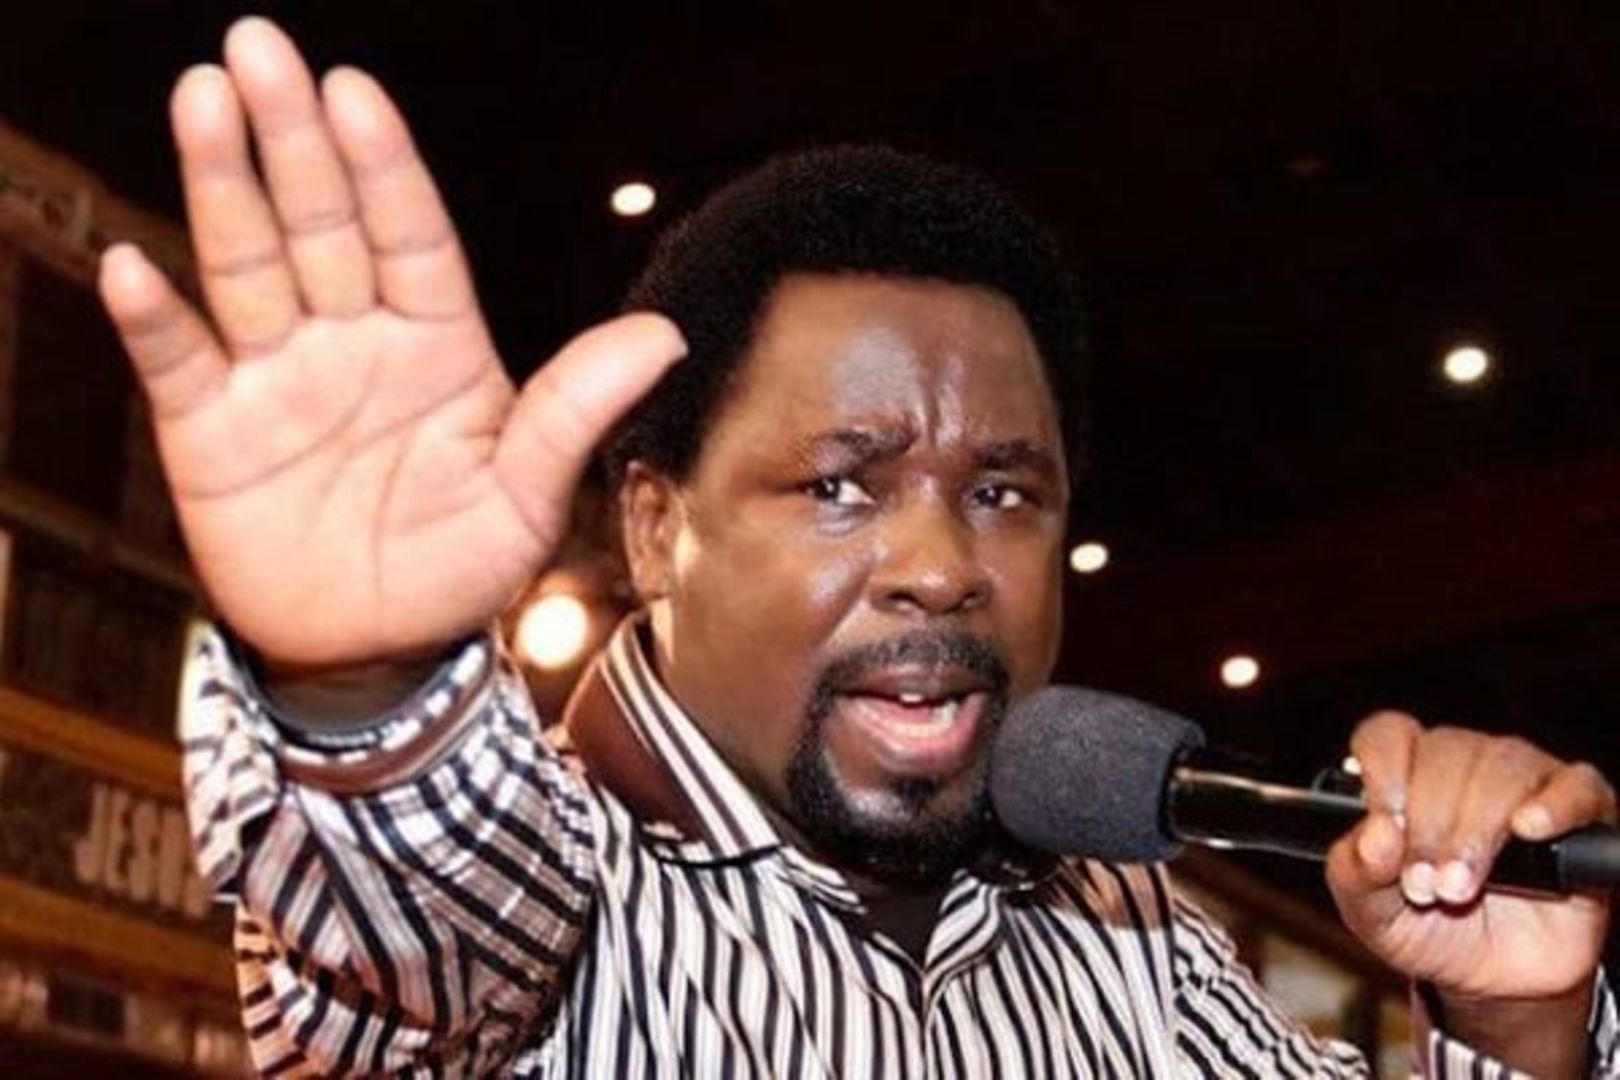 JUST IN: TB Joshua's Emmanuel TV Channel Removed